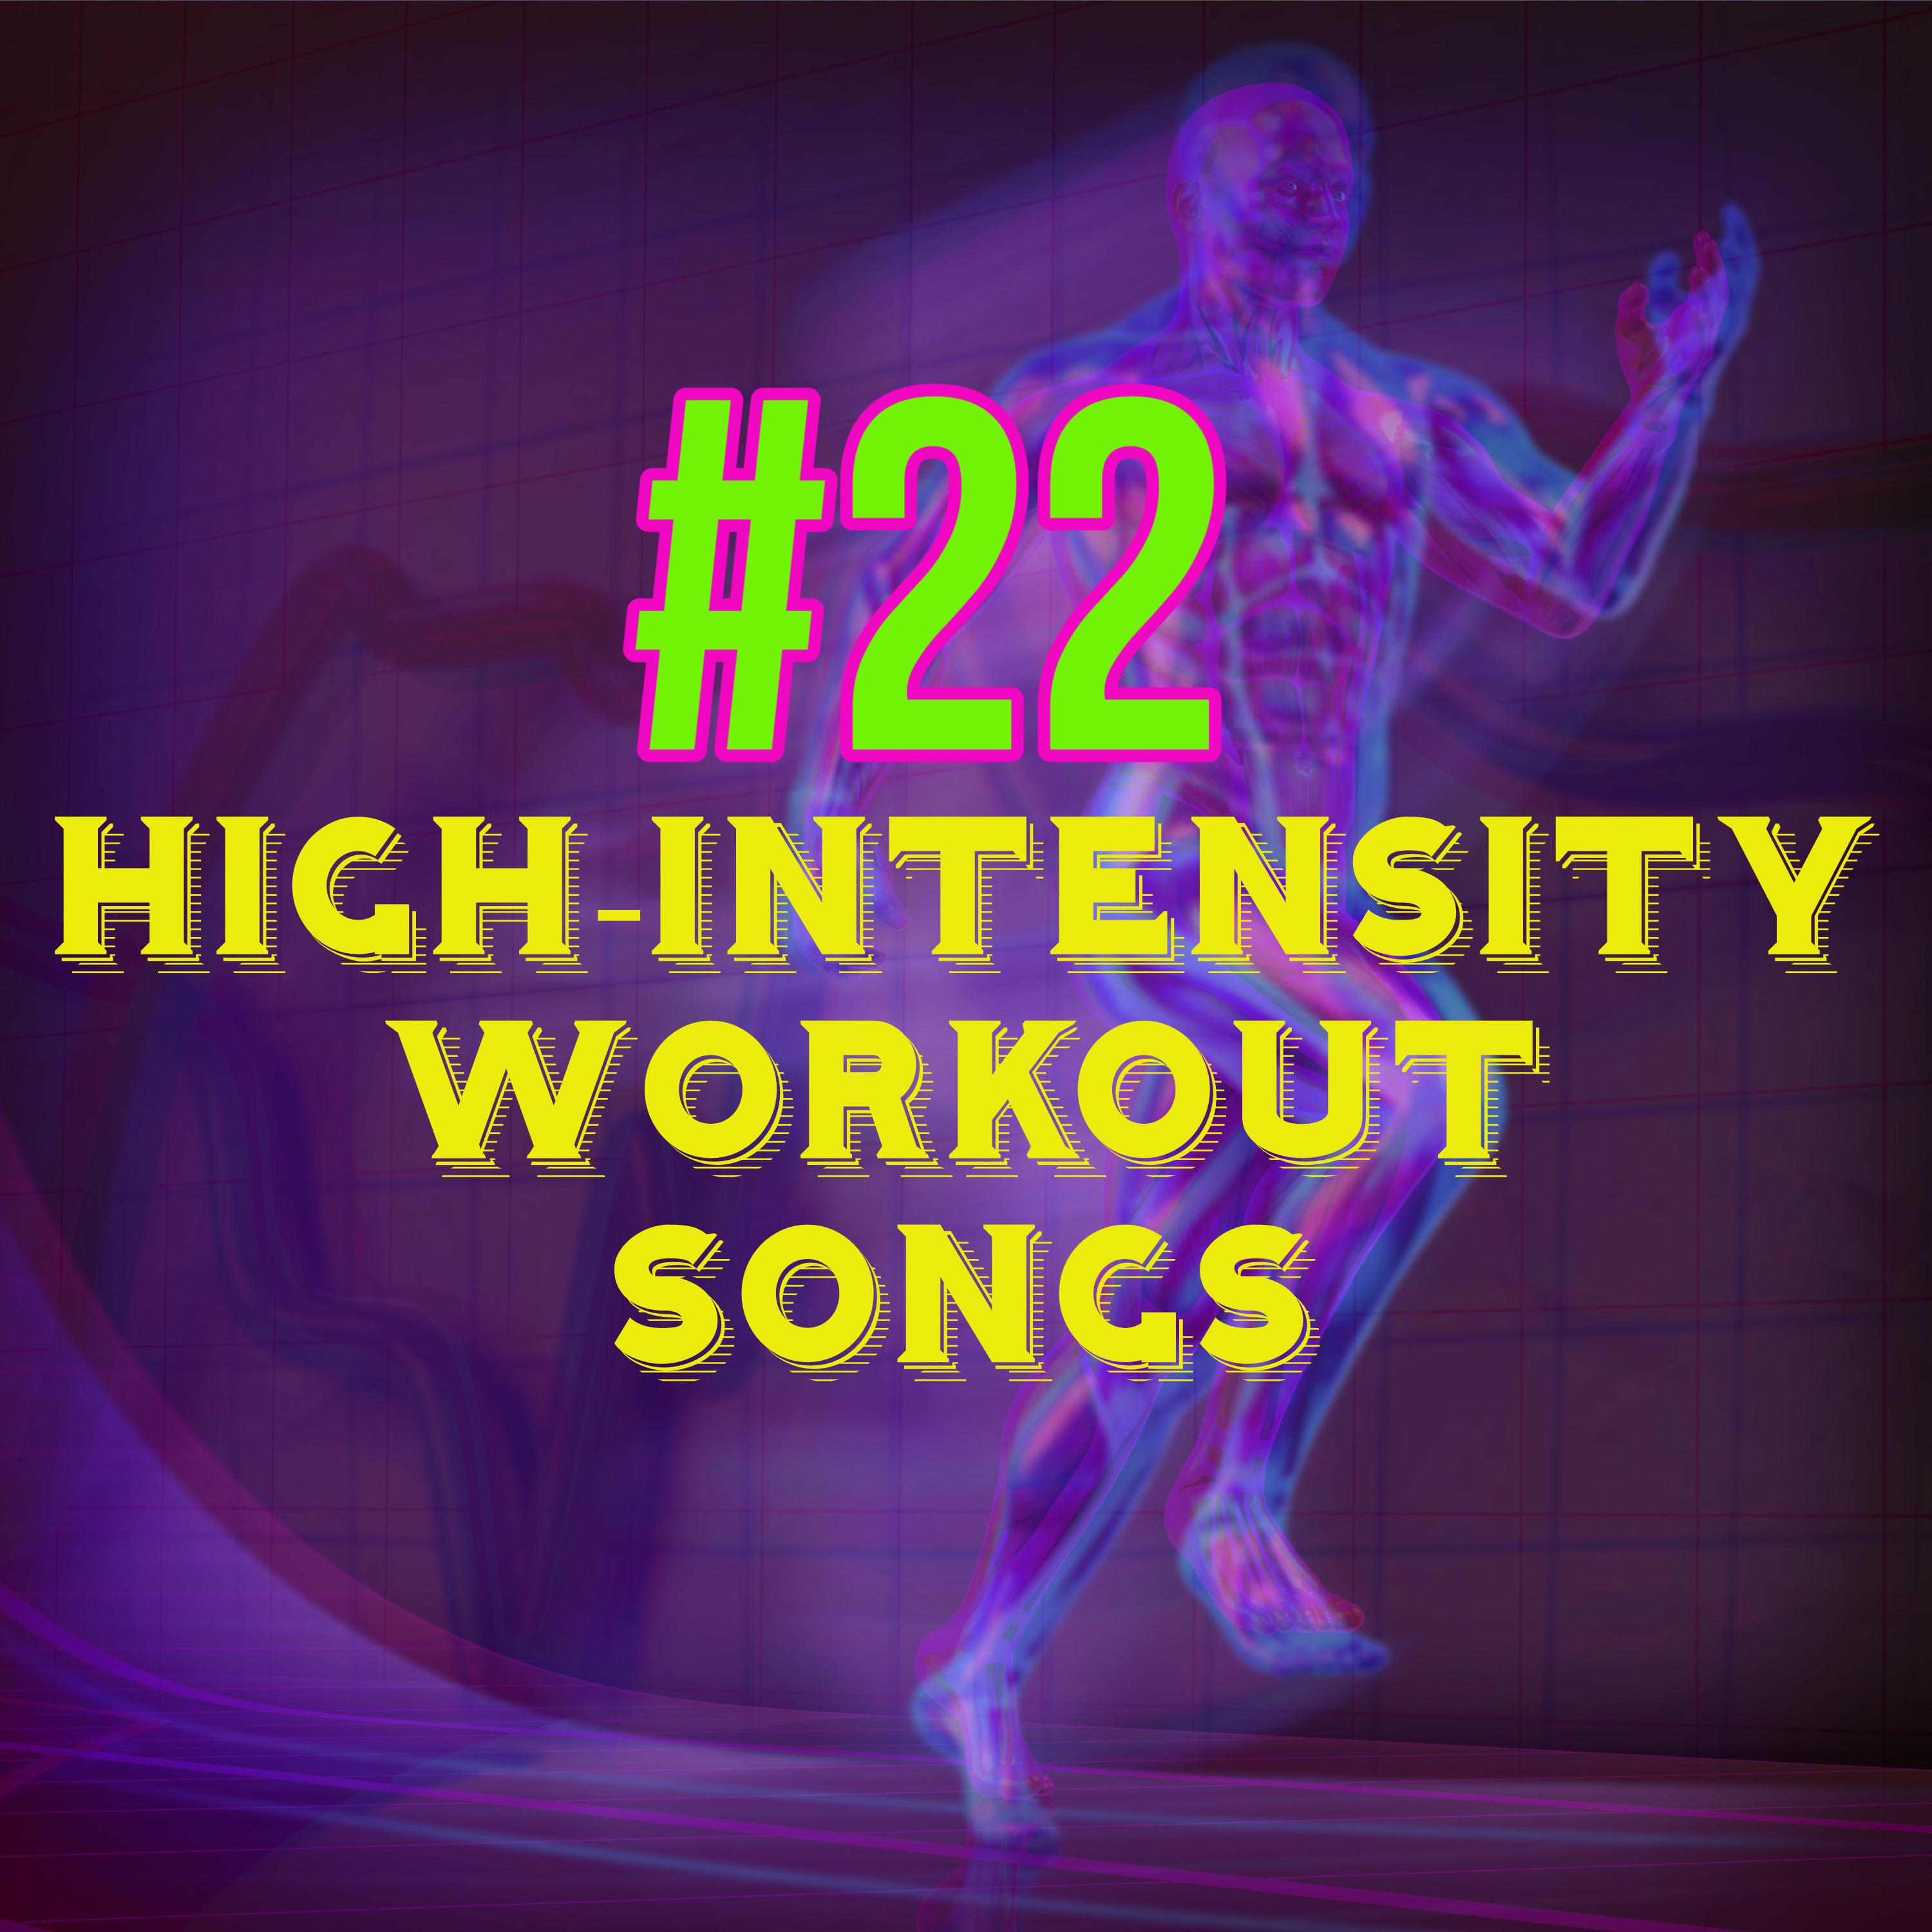 22 Highintensity Workout Songs  Metabolism Booster Cardio HIIT Highintensity Interval Training Best Workout Music House EDM for Fitness